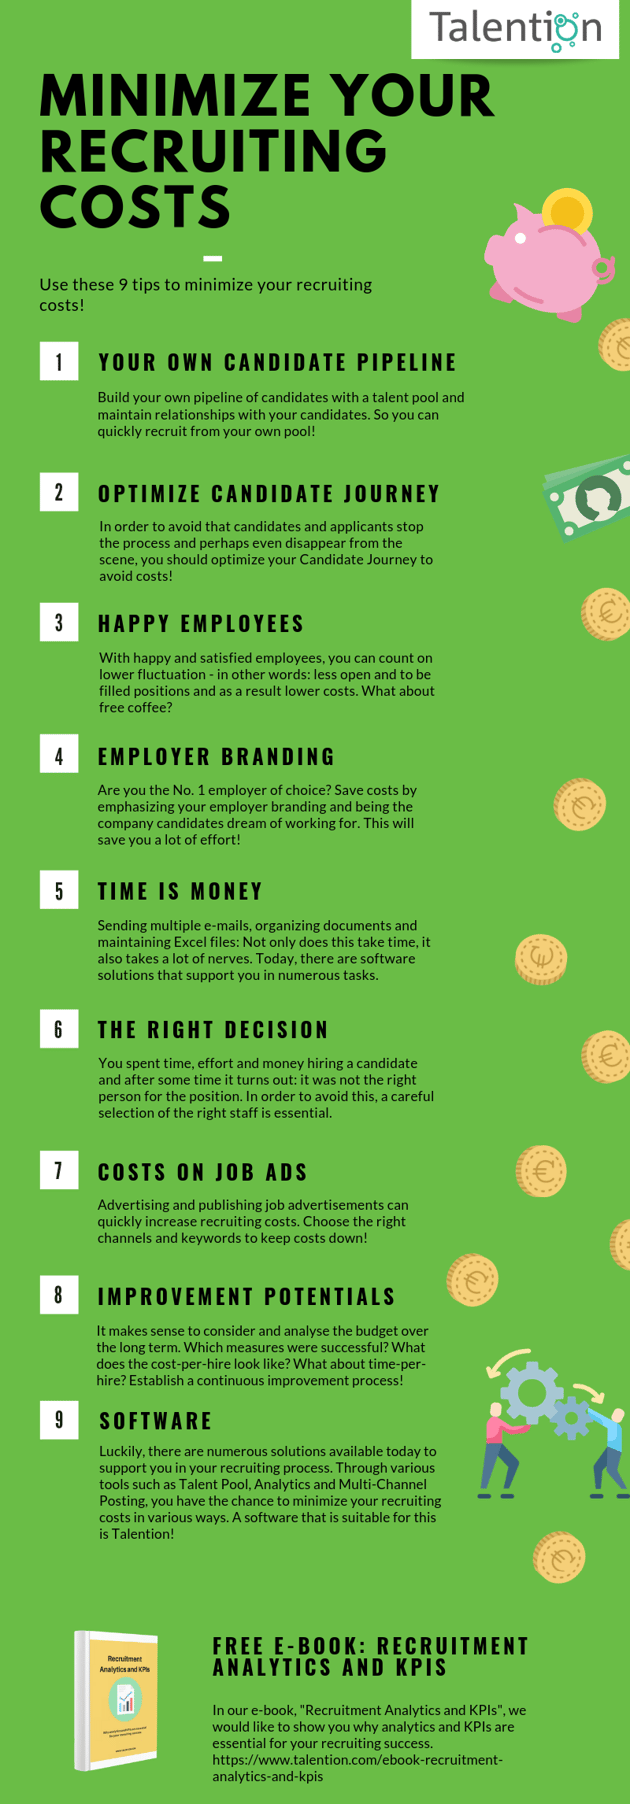 Infographic - Use these 9 tips to minimize your recruiting costs